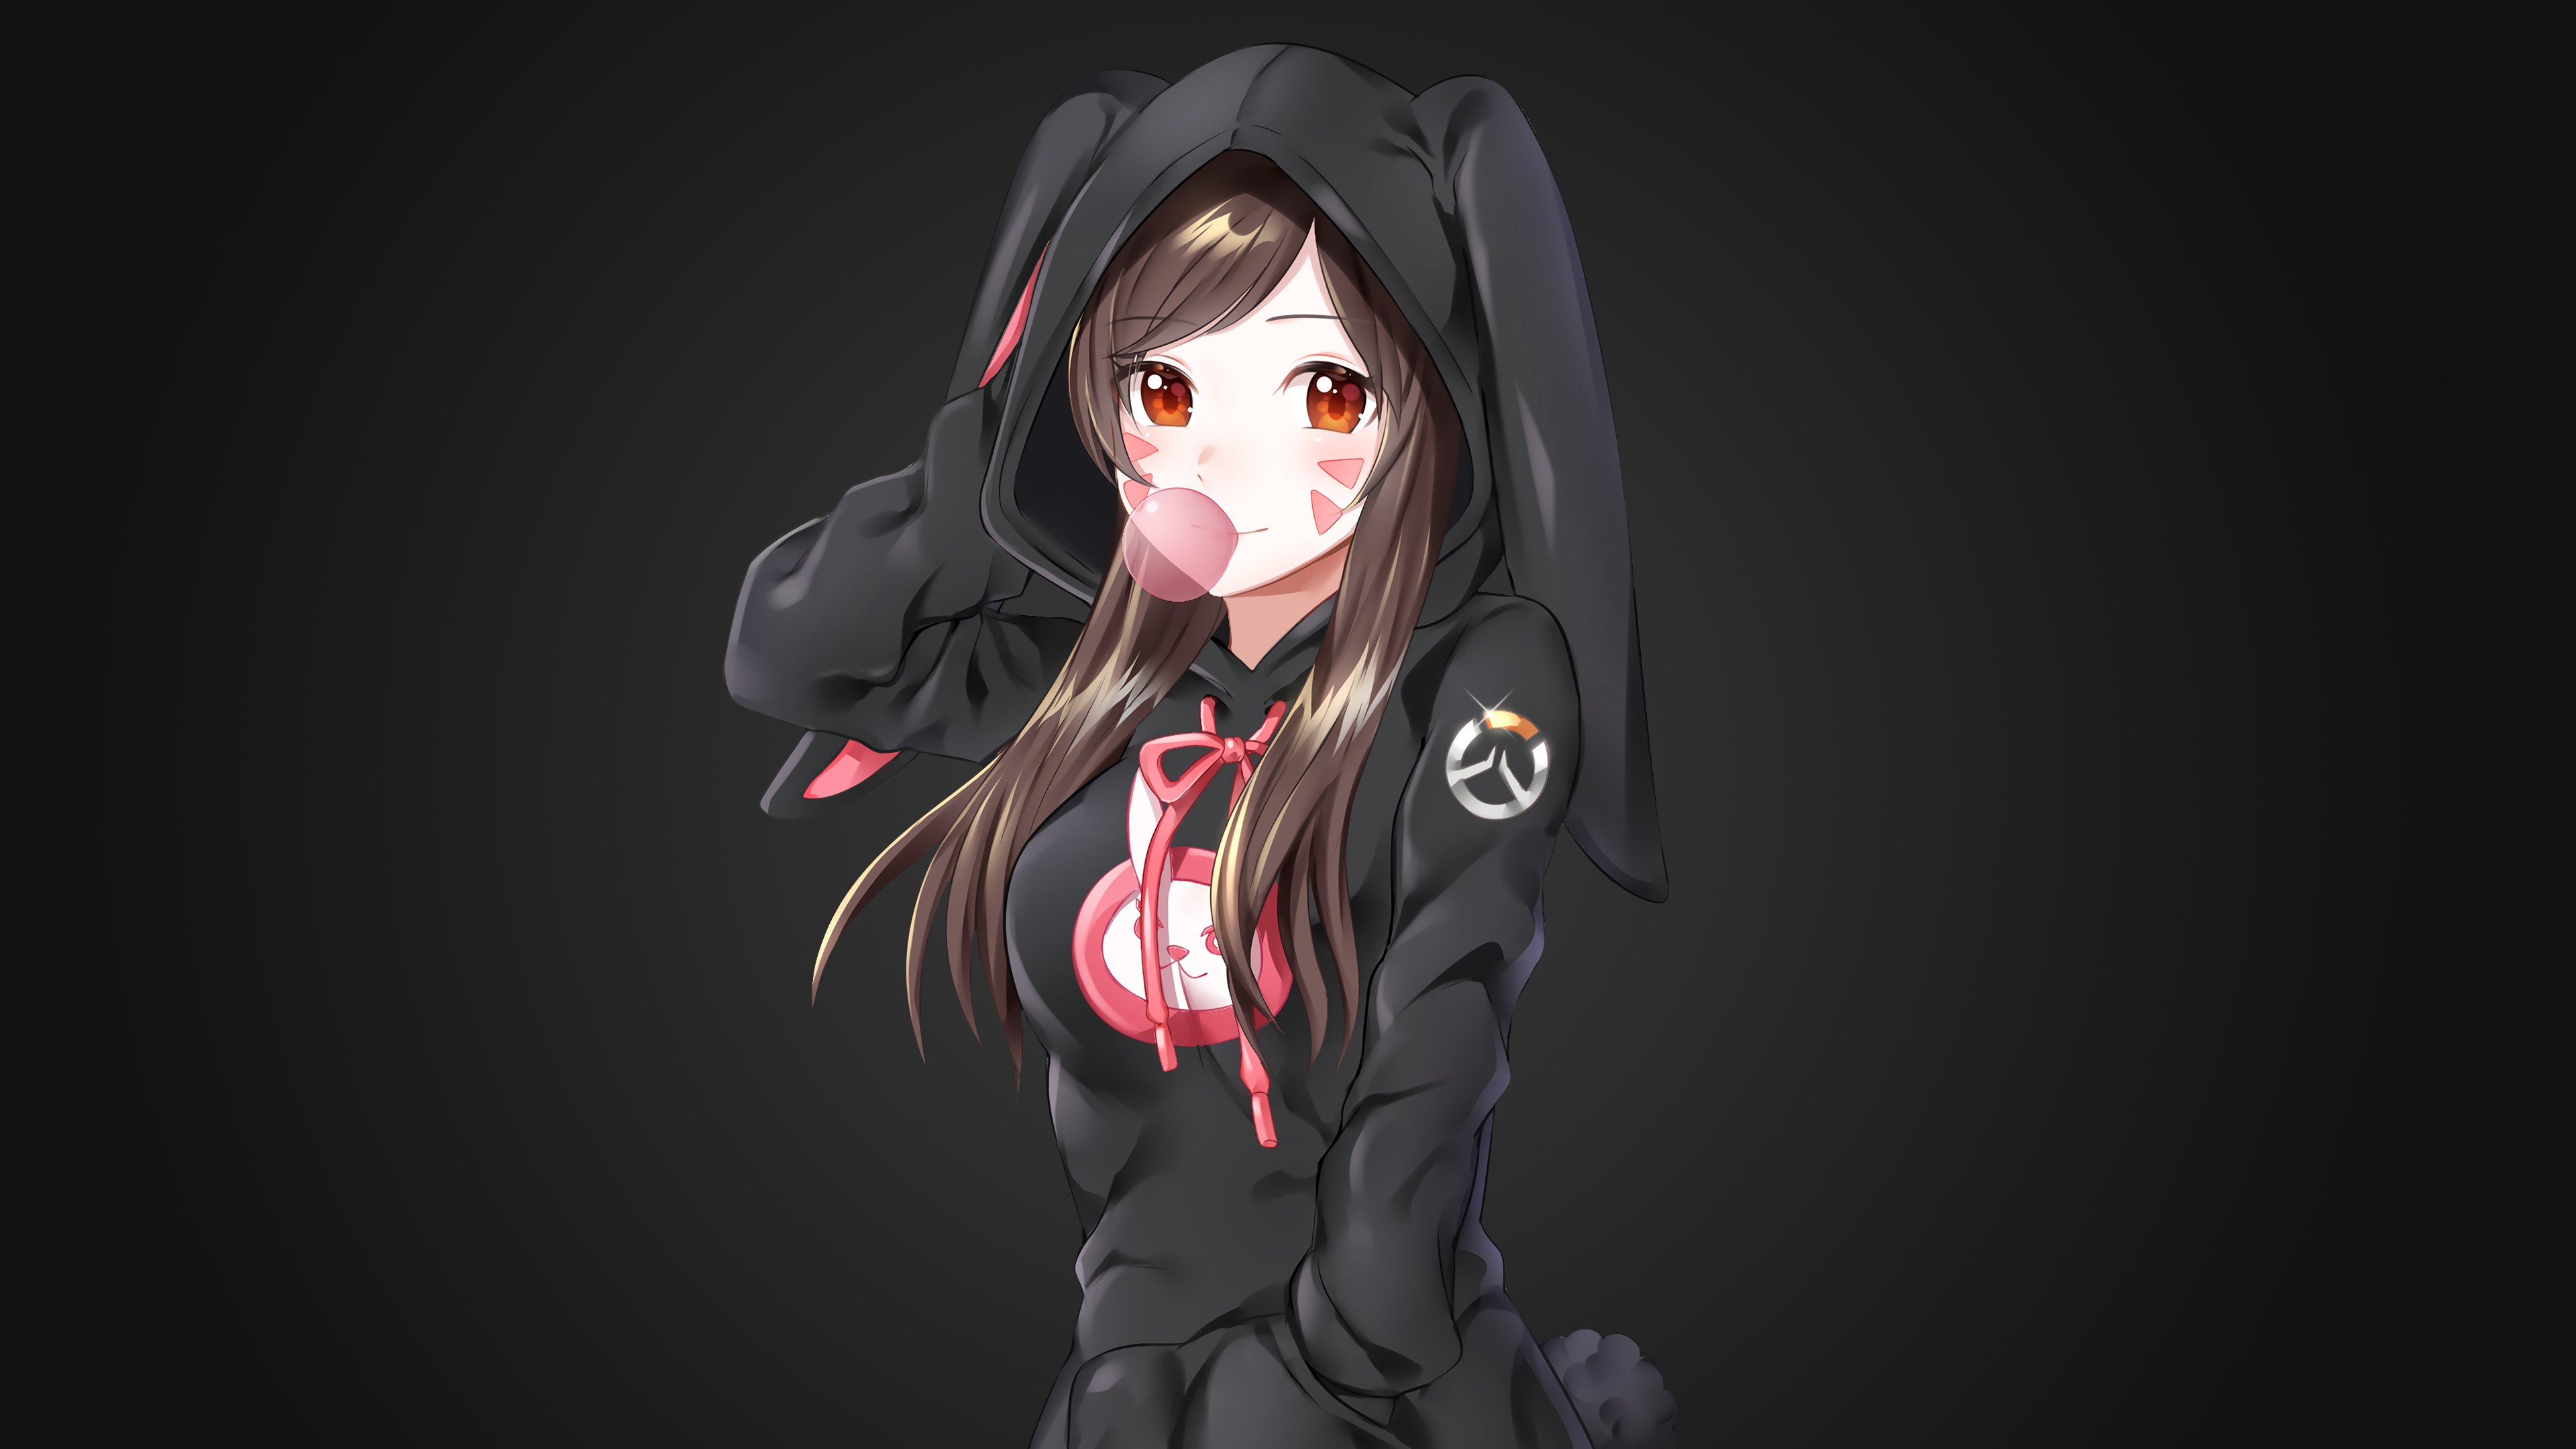 Anime Girl In Overwatch Hoodie Wallpapers